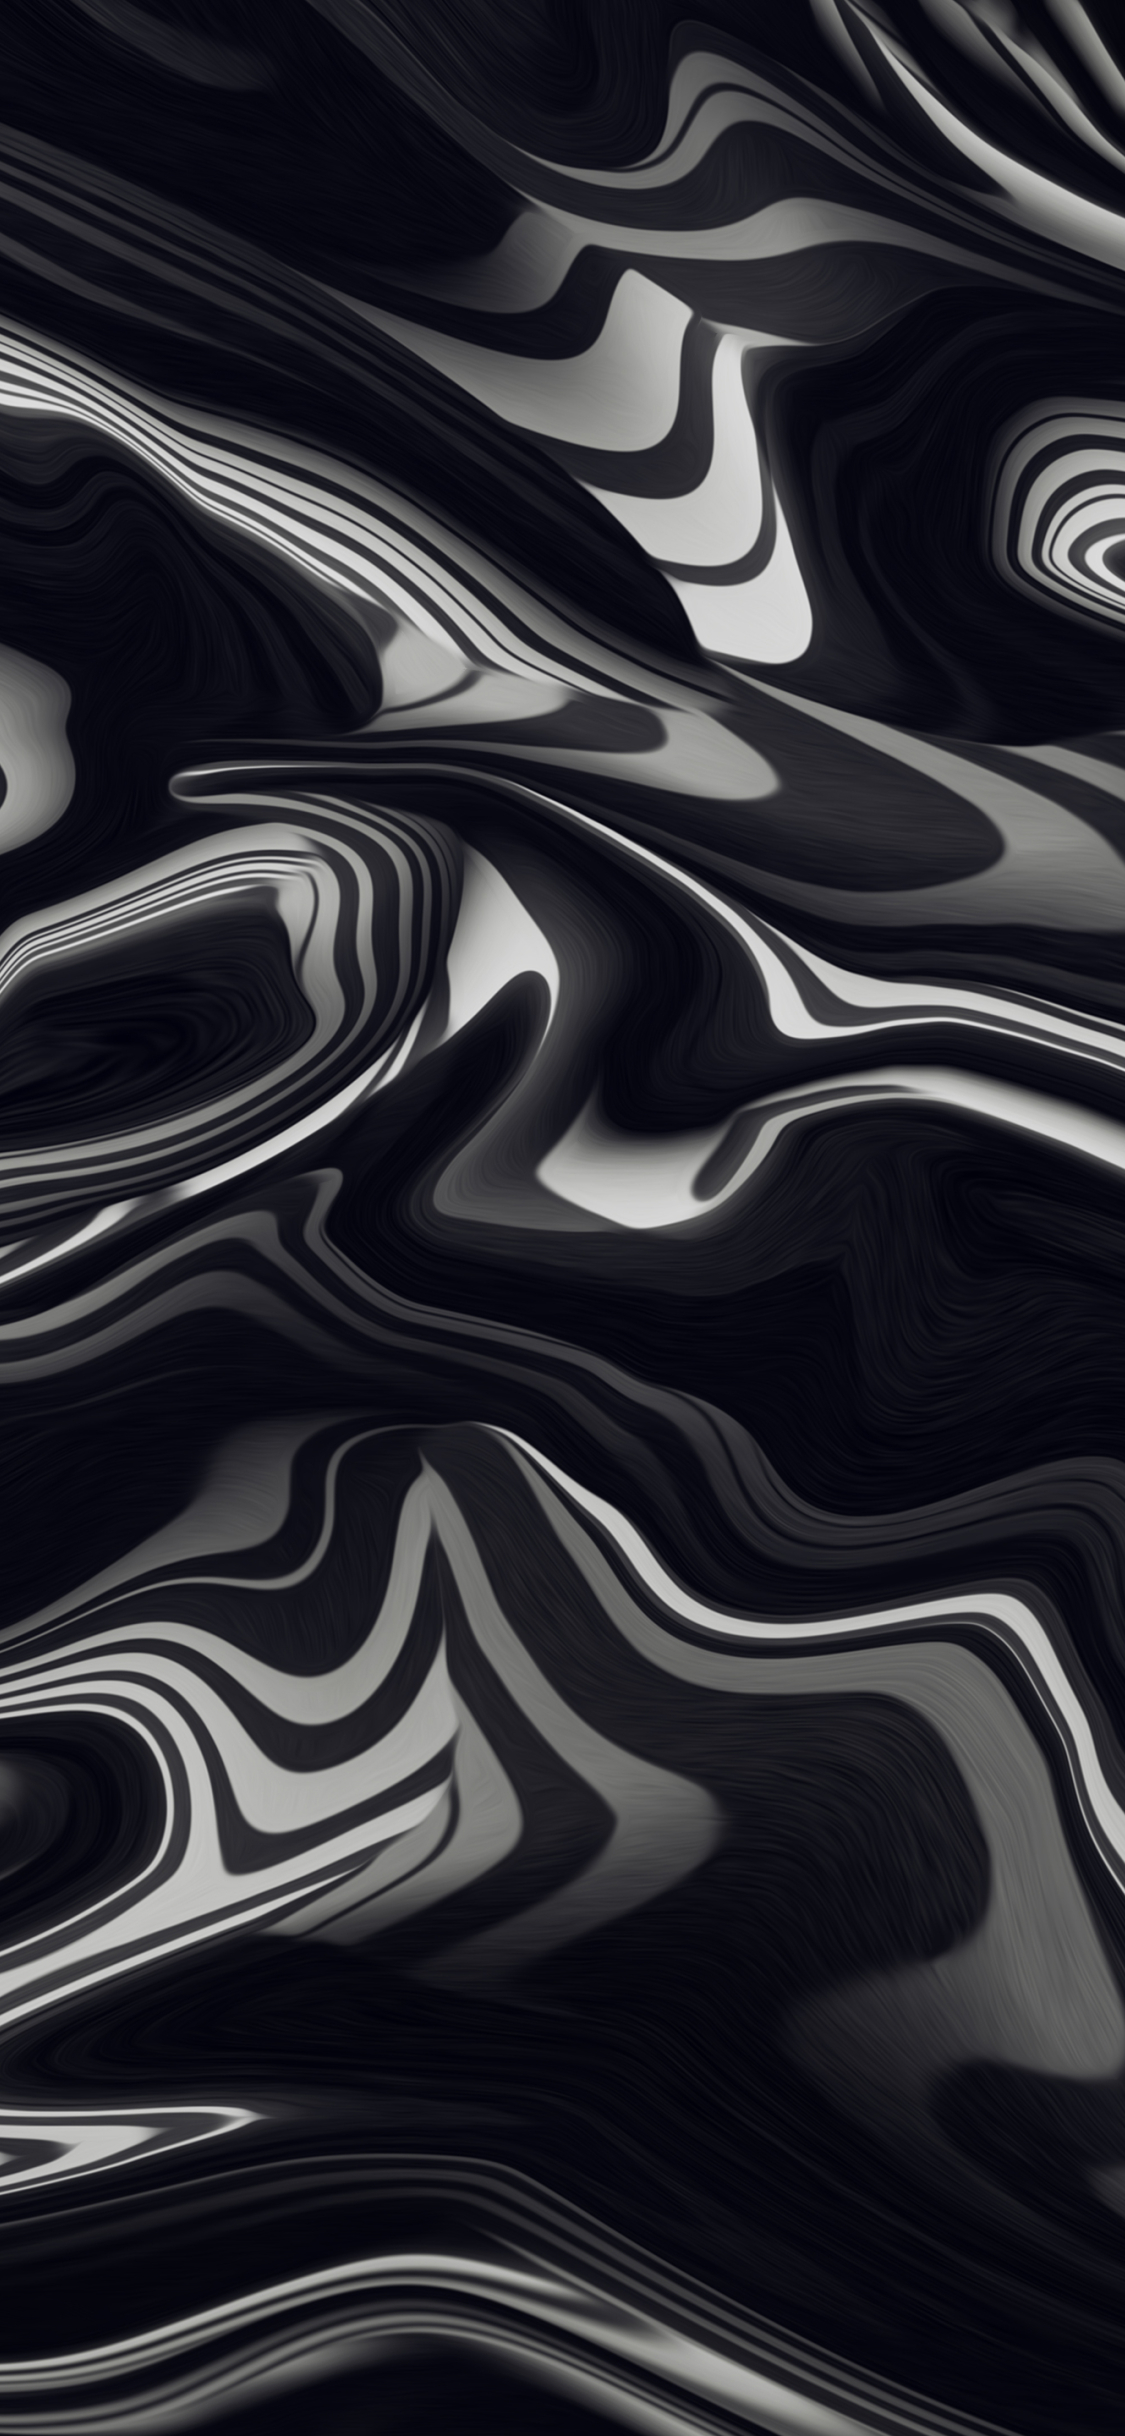 Liquid 4k uhd 16:9 wallpapers hd, desktop backgrounds 3840x2160, images and  pictures